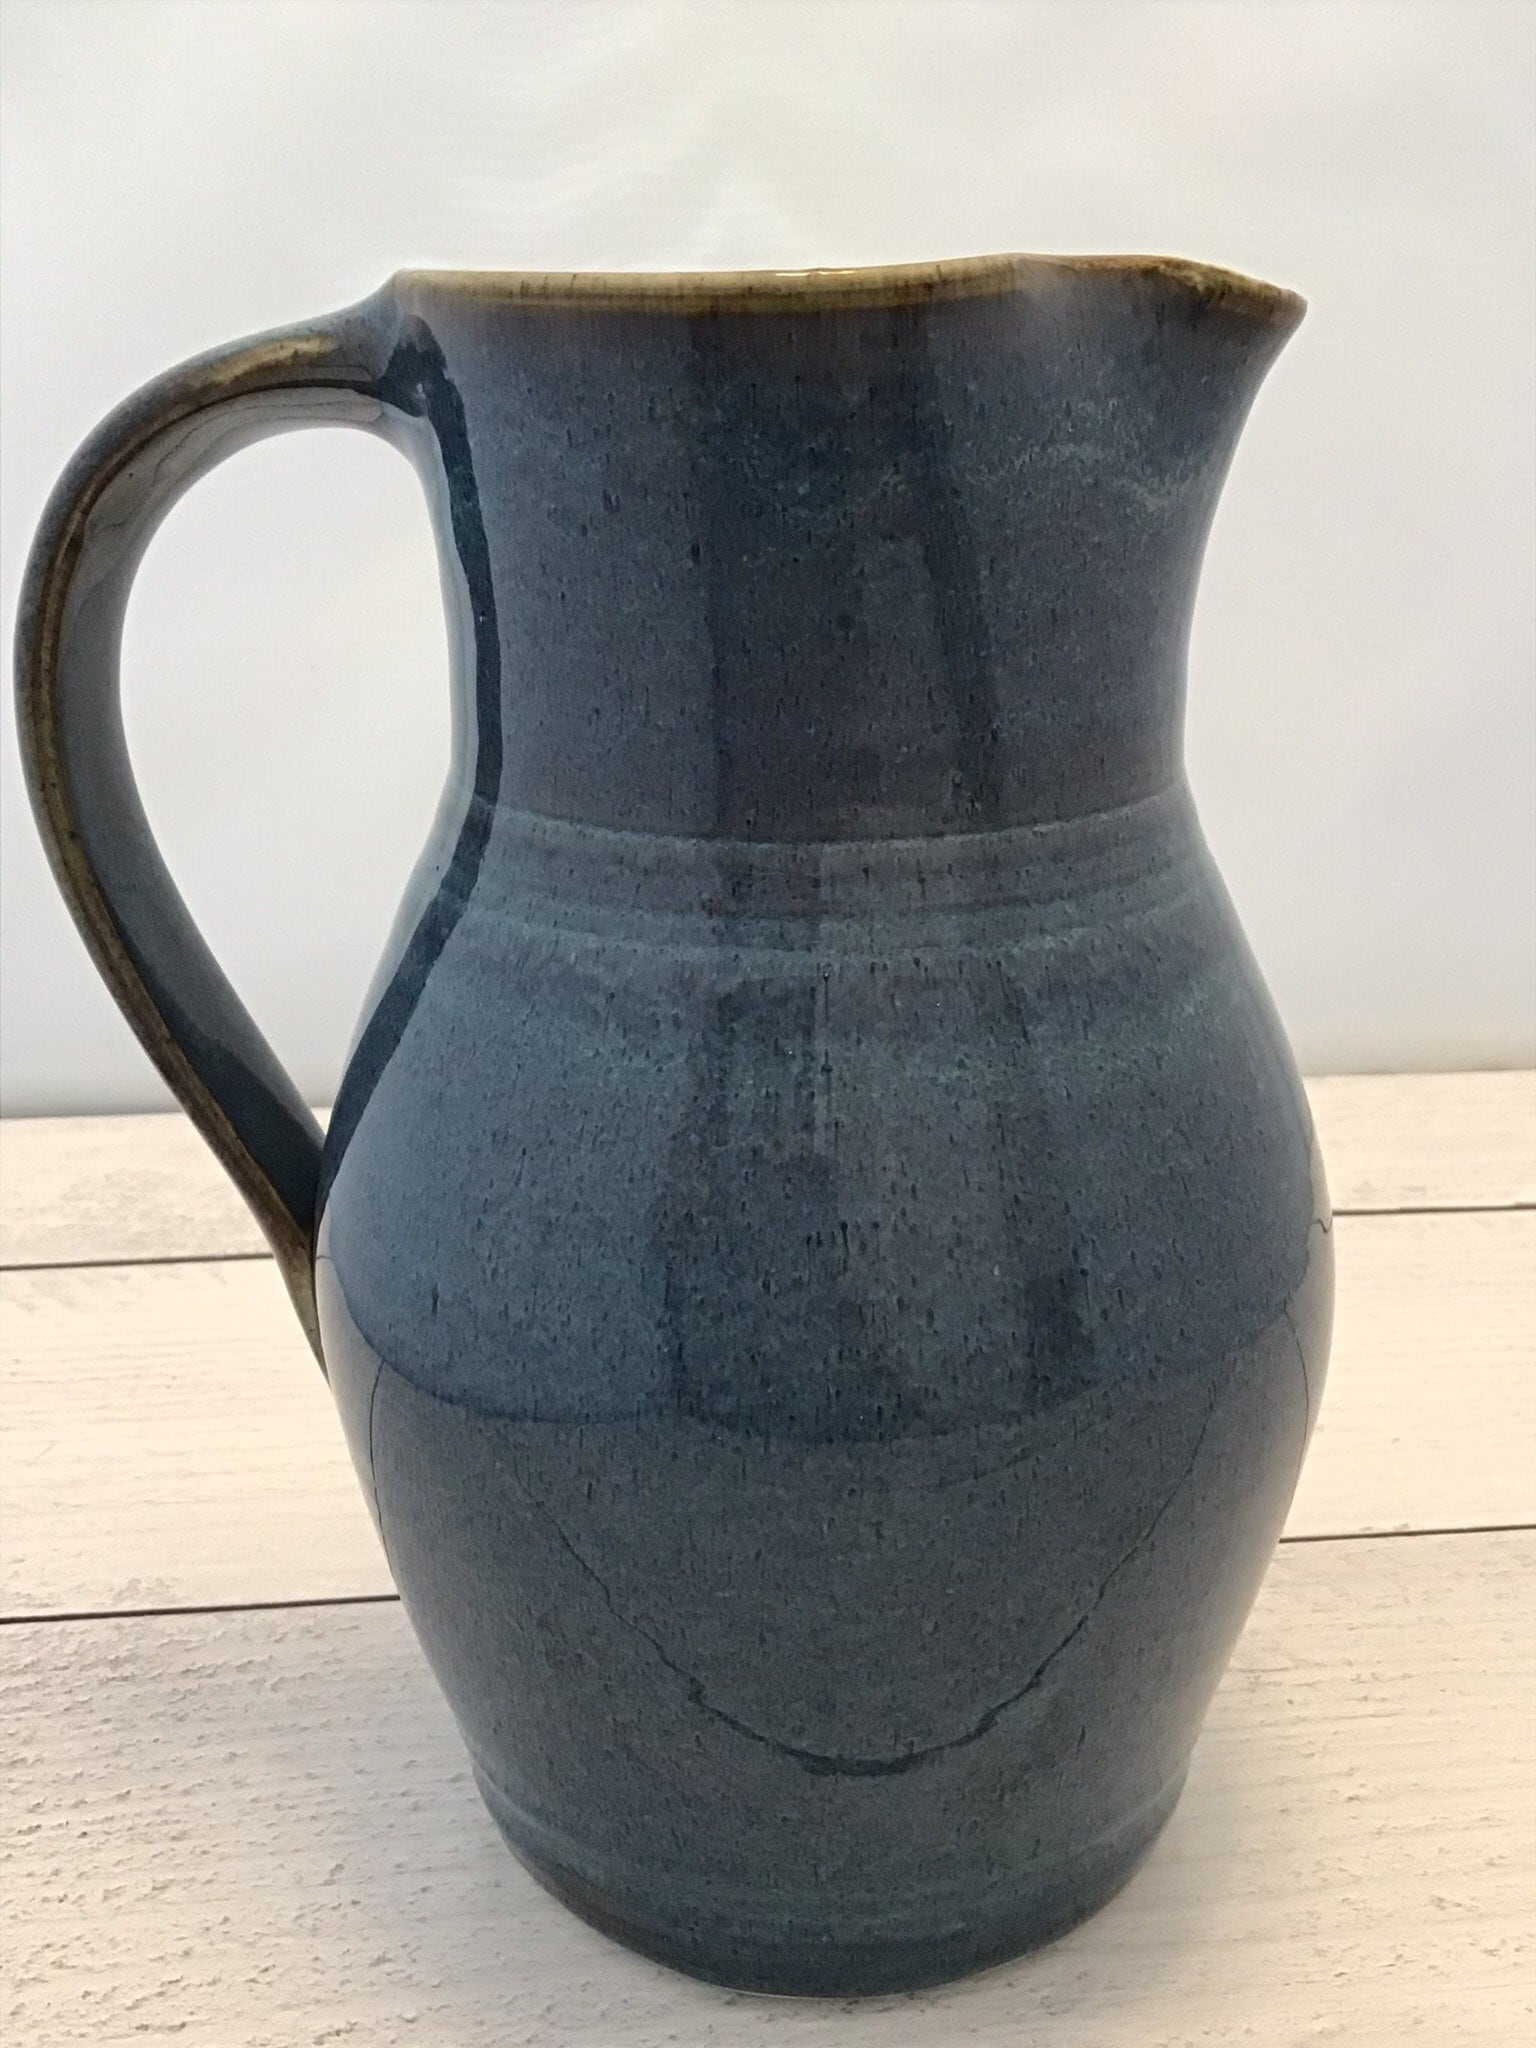 Water or Ice Tea Pitcher quart size handmade pottery for coffee